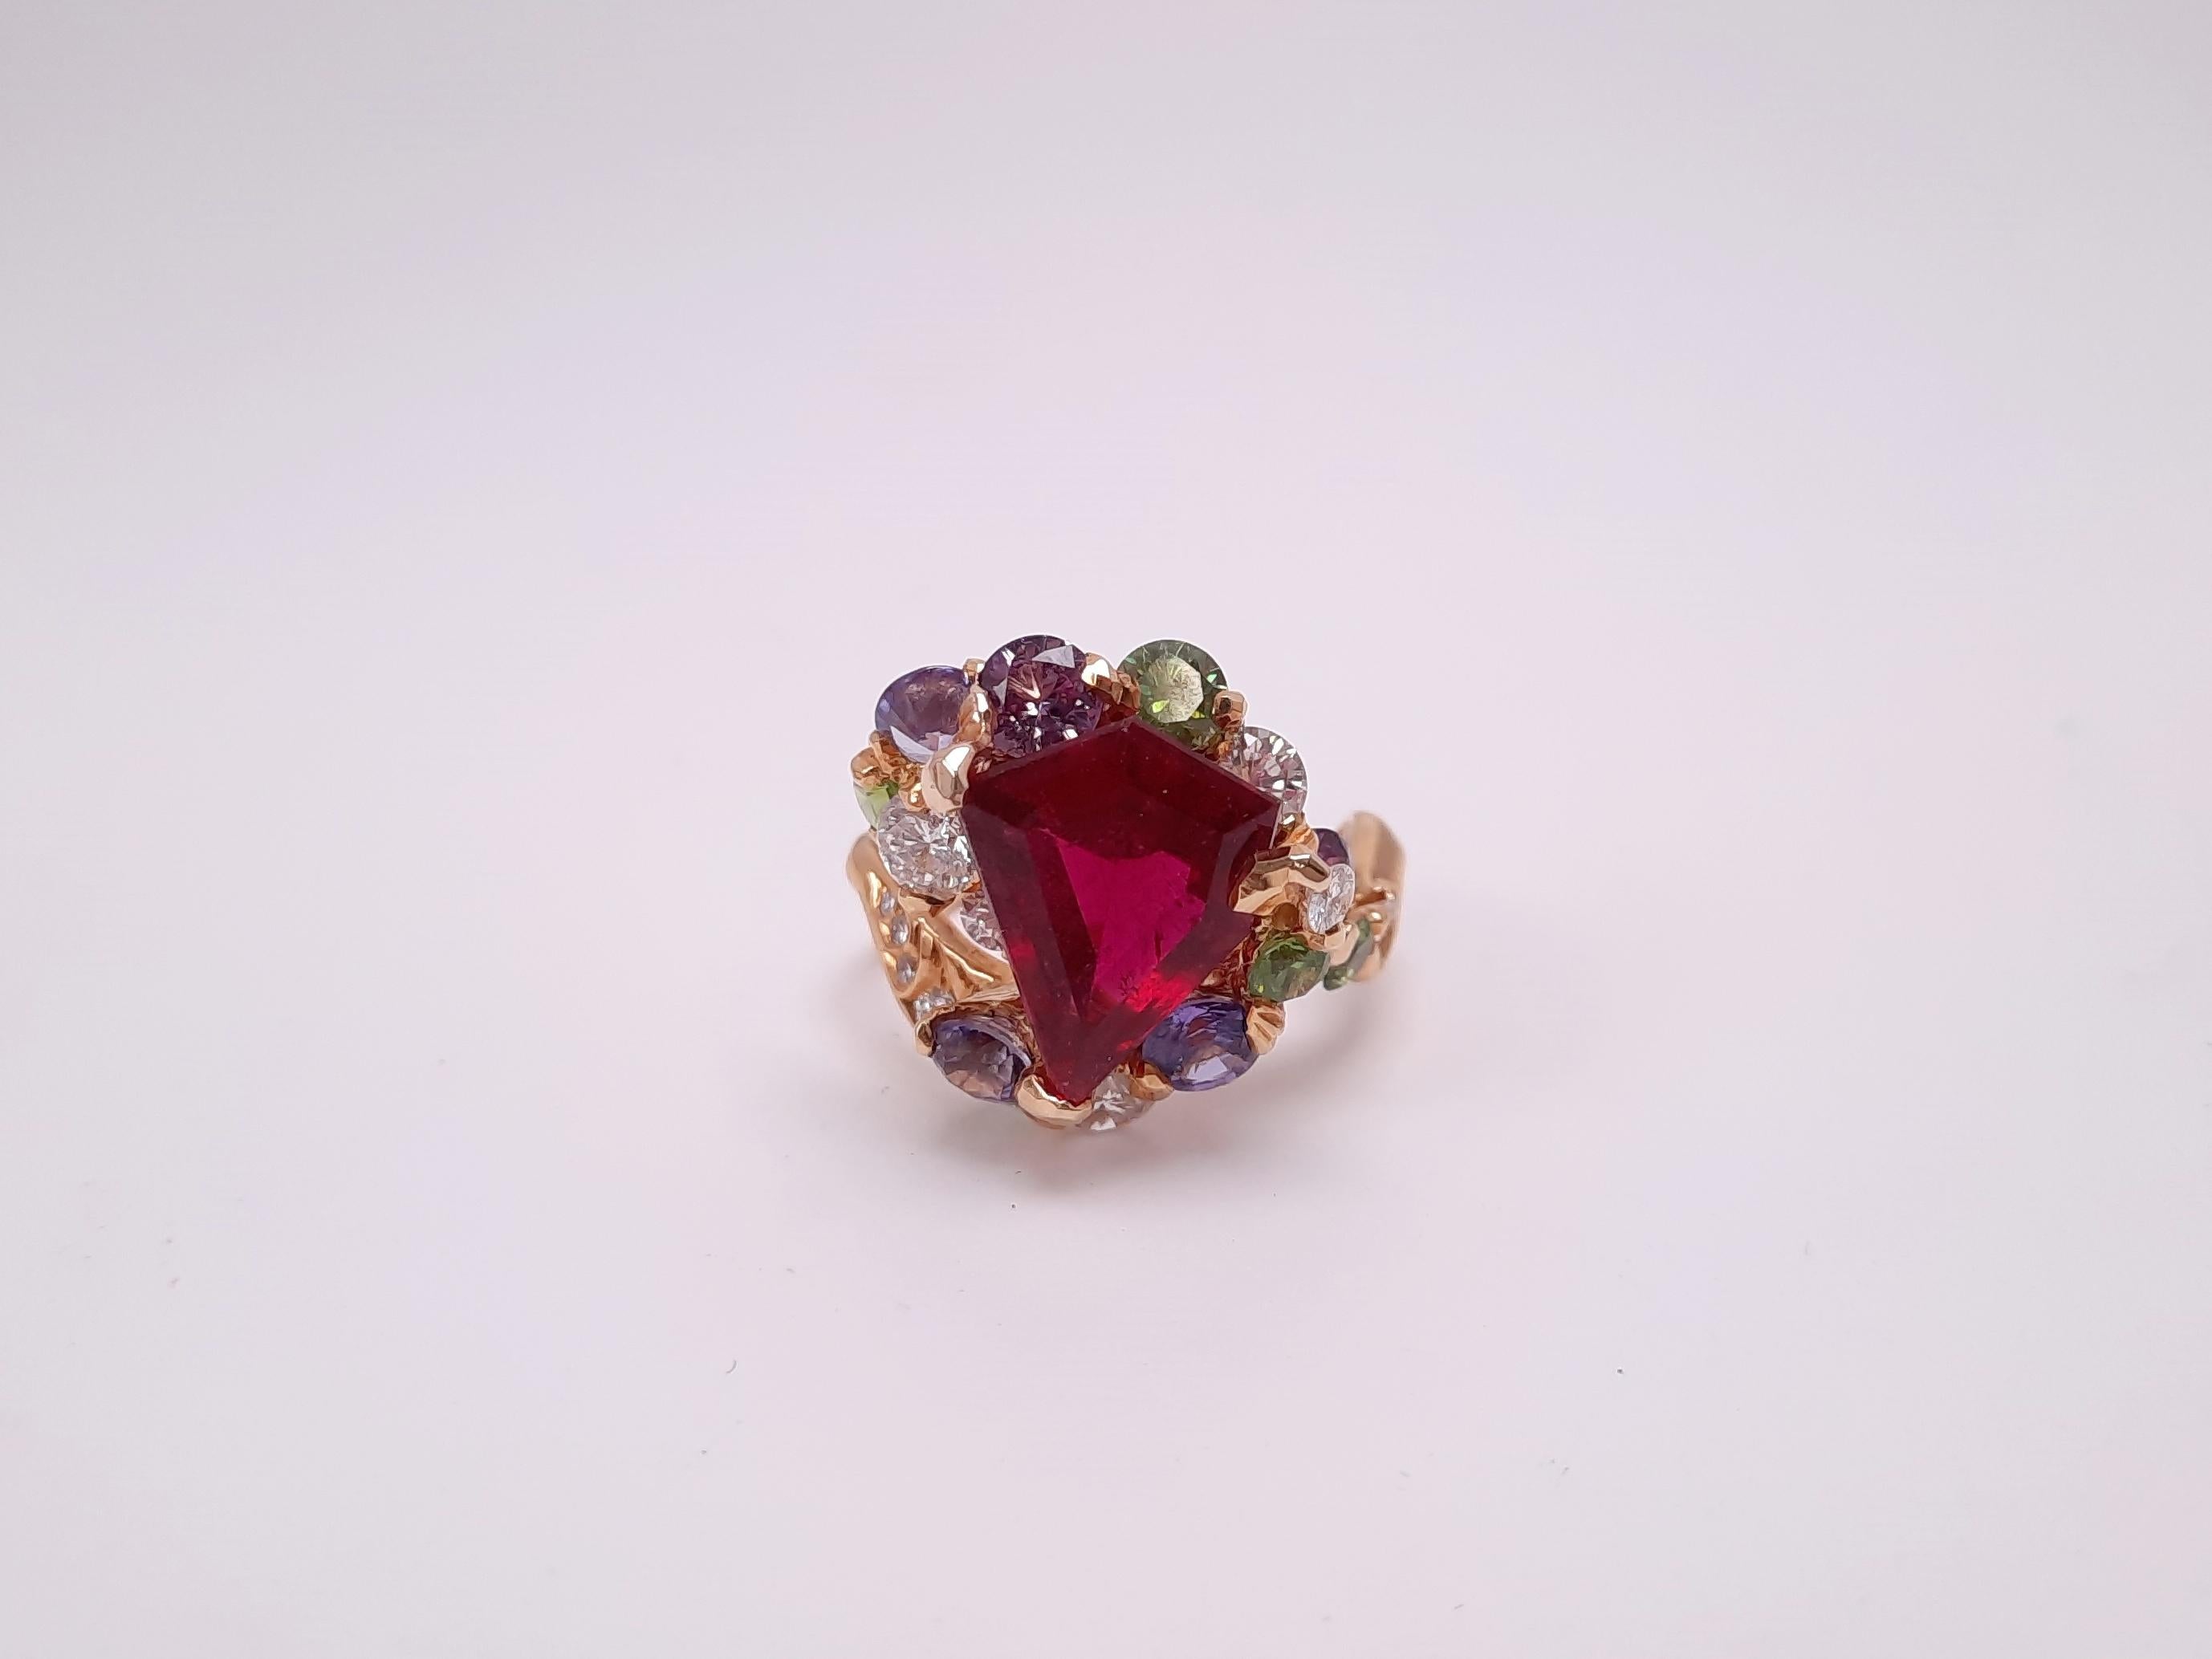 A MOISEIKIN's handmade gold ring with a fancy shape, vivid rubellite, shimmering diamonds, multi-colour sapphires, and rare demantoid garnets reminds you of a sparkling Christmas tree or the New Year decoration for this festive season. The Artful